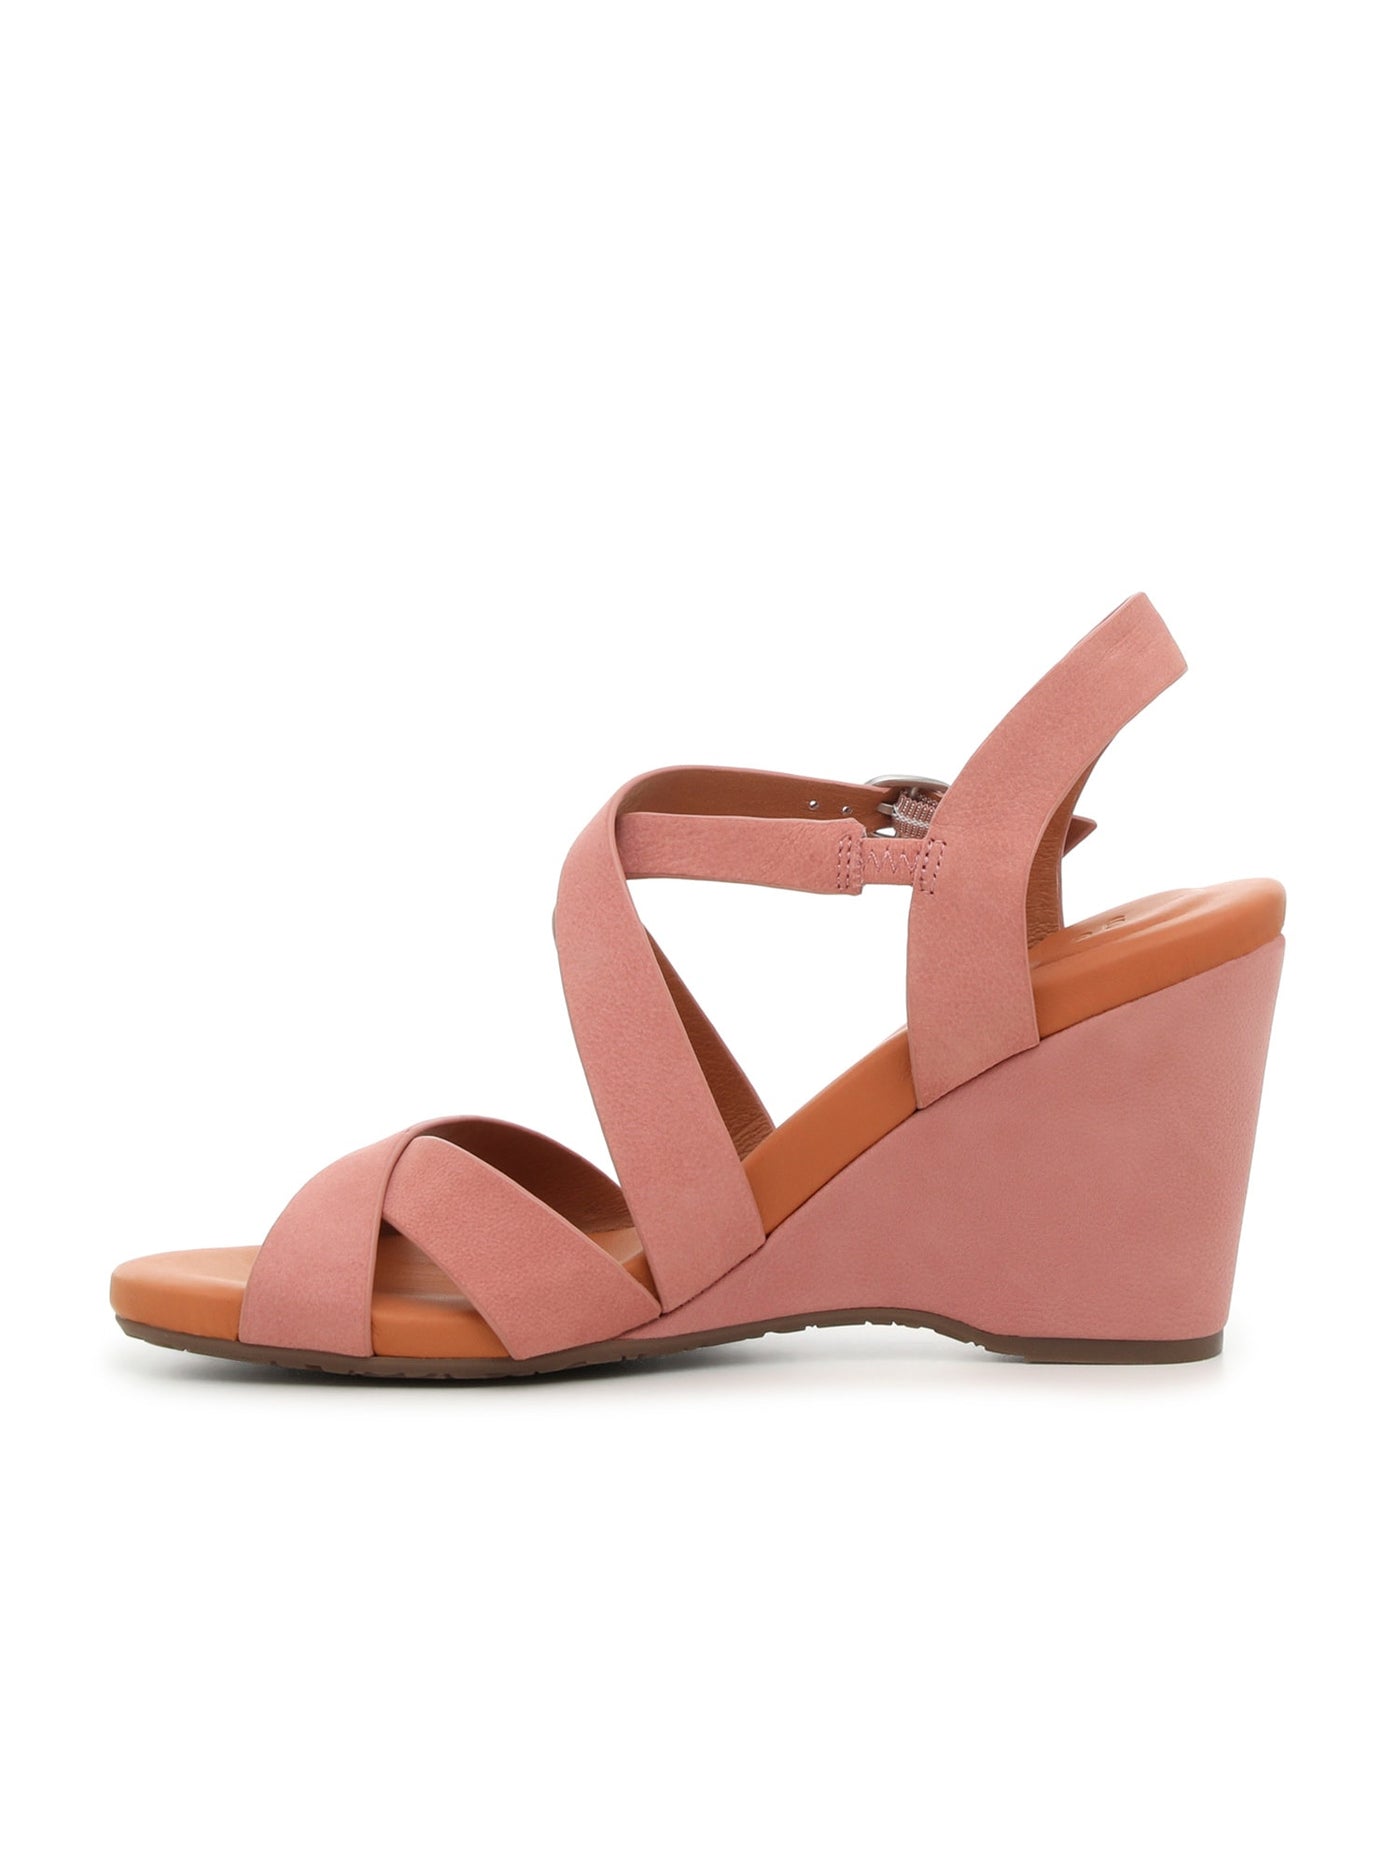 GENTLE SOULS KENNETH COLE Womens Pink Goring Cushioned Isla Round Toe Wedge Buckle Leather Heeled Sandal 6.5 M